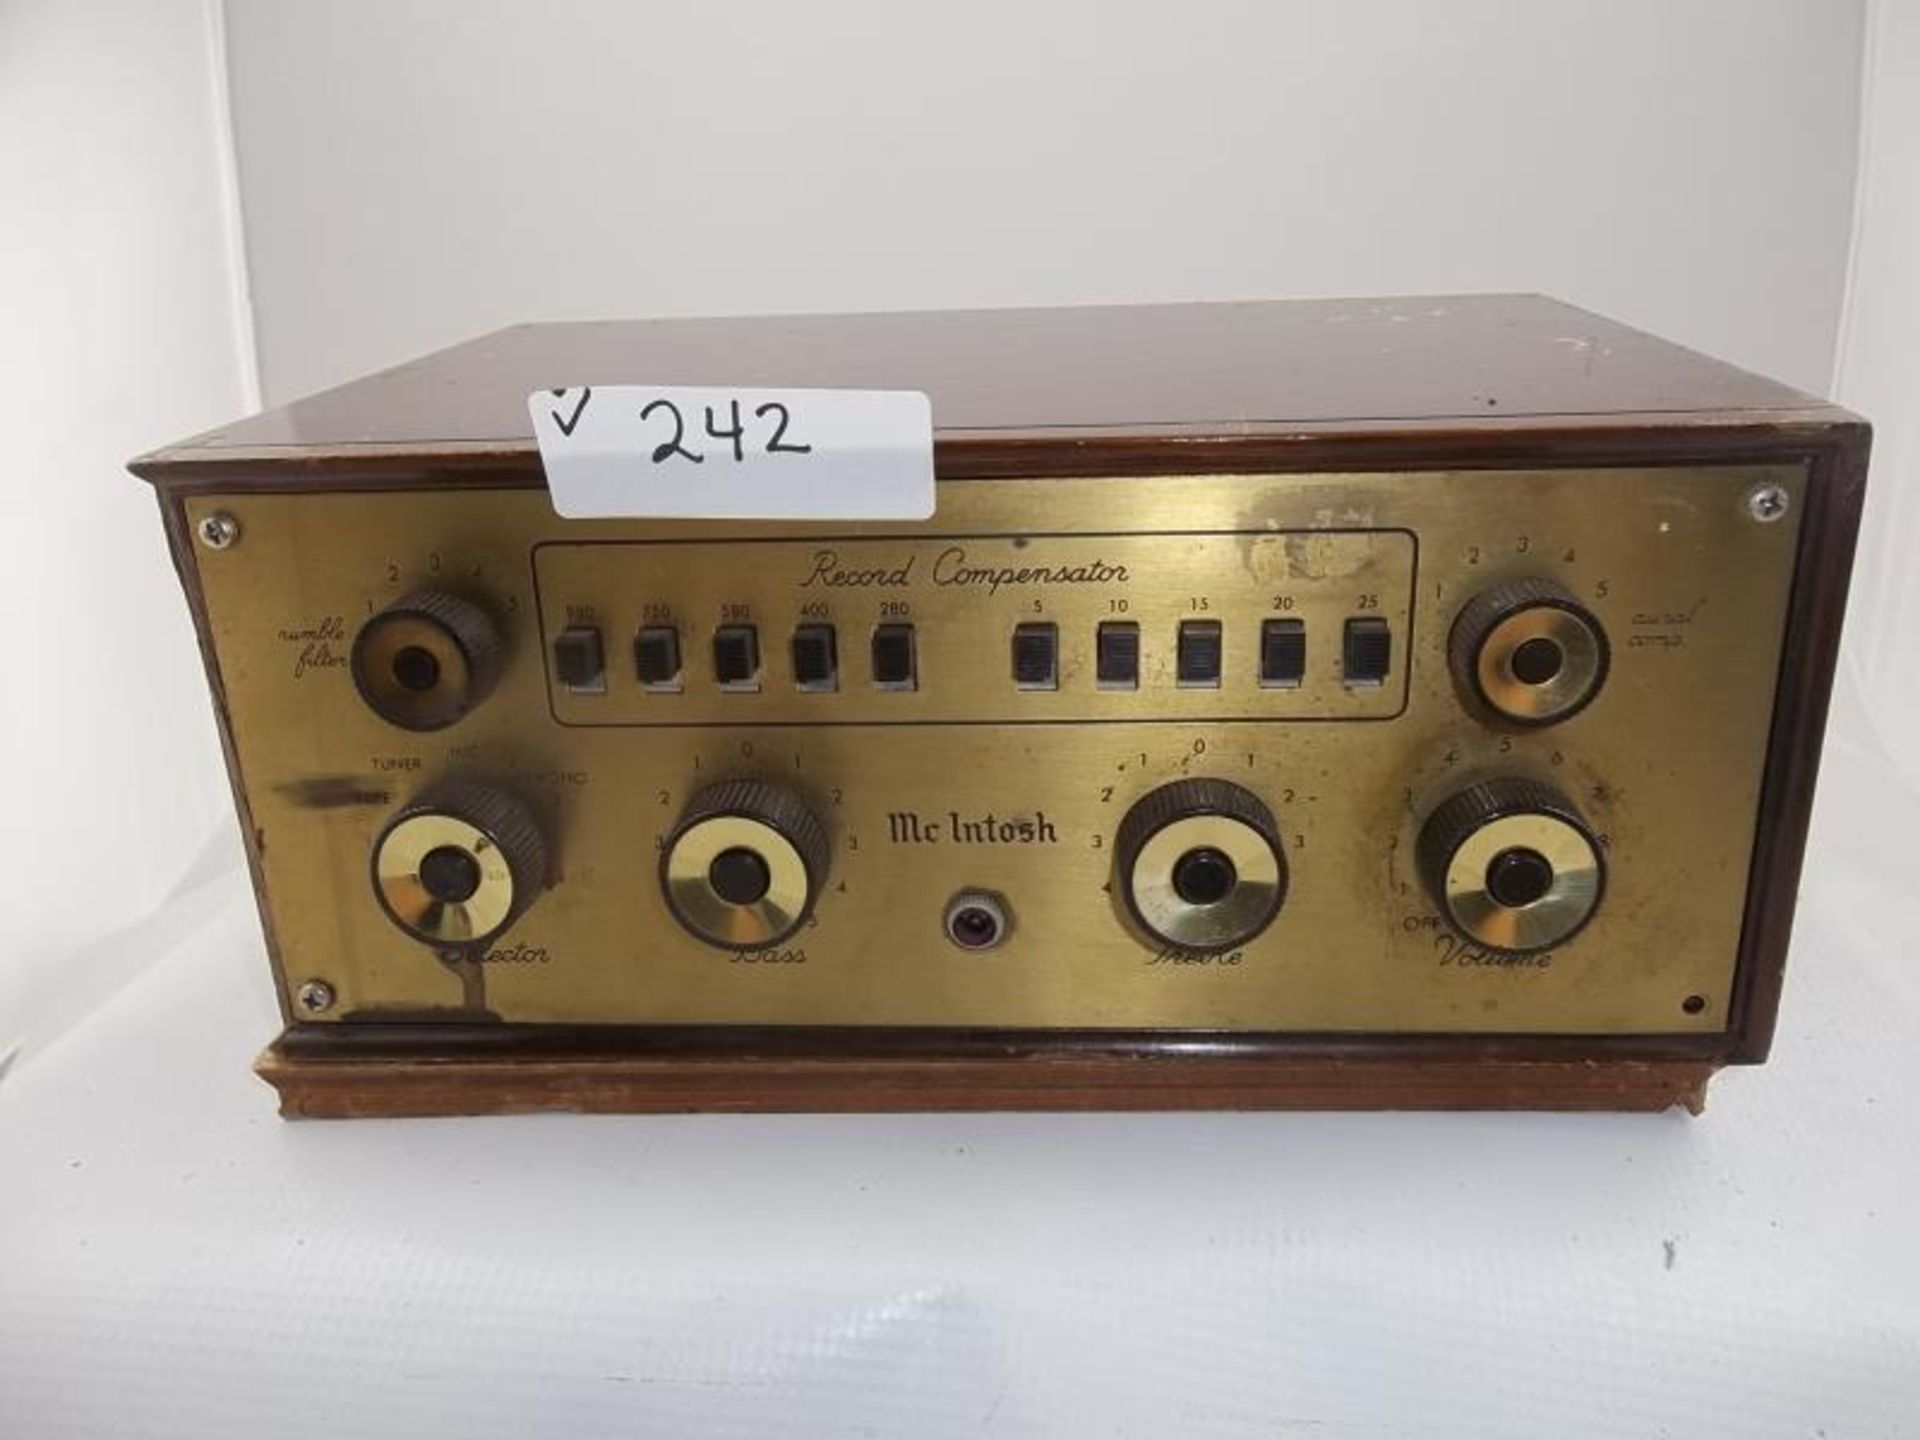 McIntosh Record Compensator, C-8, w/ case, scratched, facee plate damaged, tested - powers up, s#